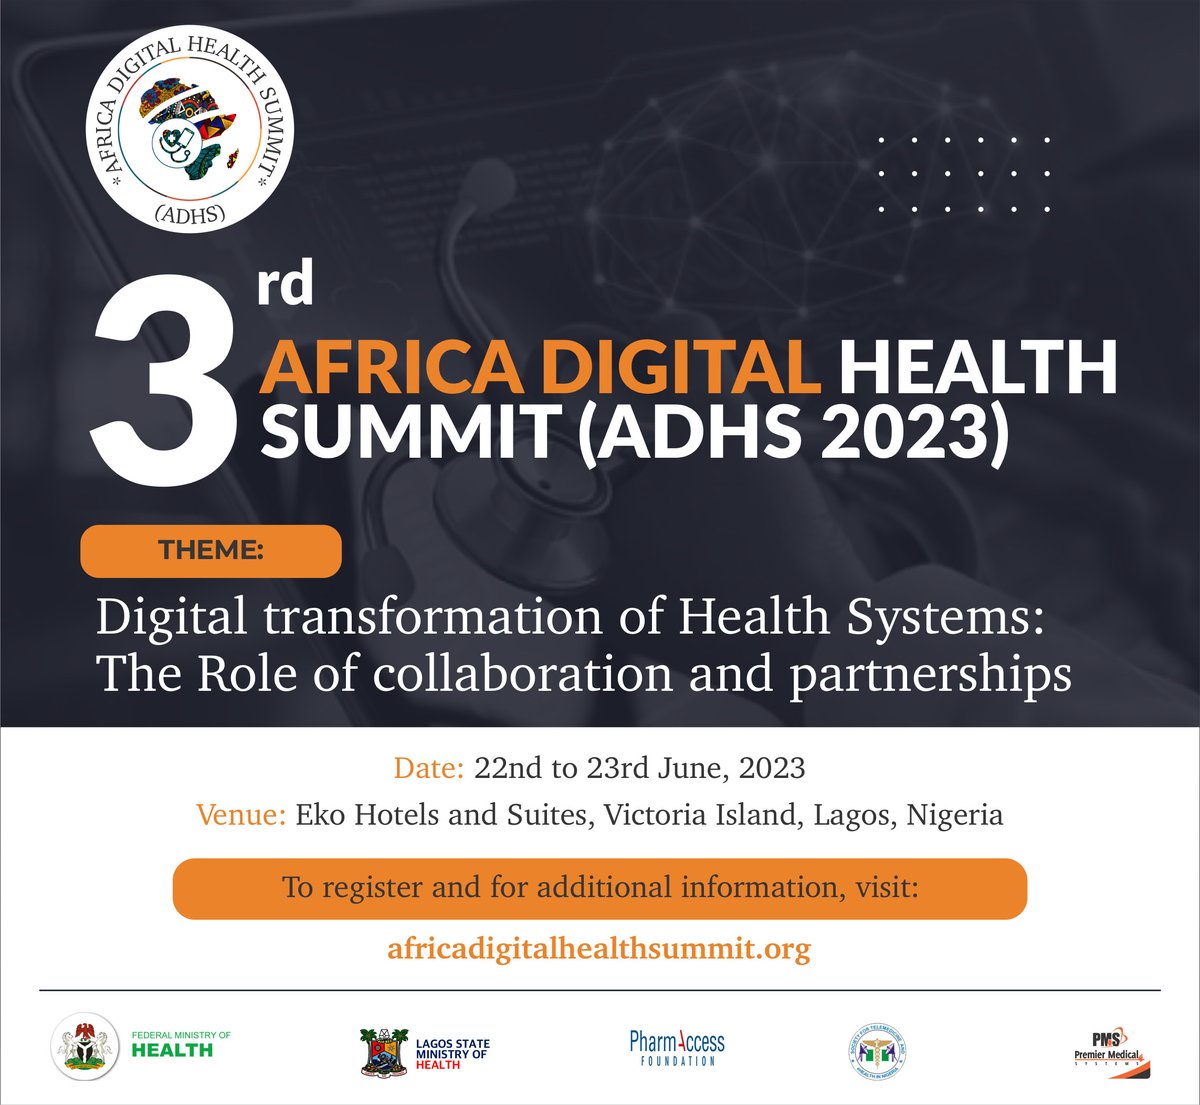 We are pleased to inform the public that we will be presenting the lesson learned on the Antenatal Risk Stratification Project managed by our team and
@HeliumHealth at the @adhsummit next week.  

Meet our team: 🔗africadigitalhealthsummit.org/en/2023-speake…

#Adhs2023 
#Publichealth